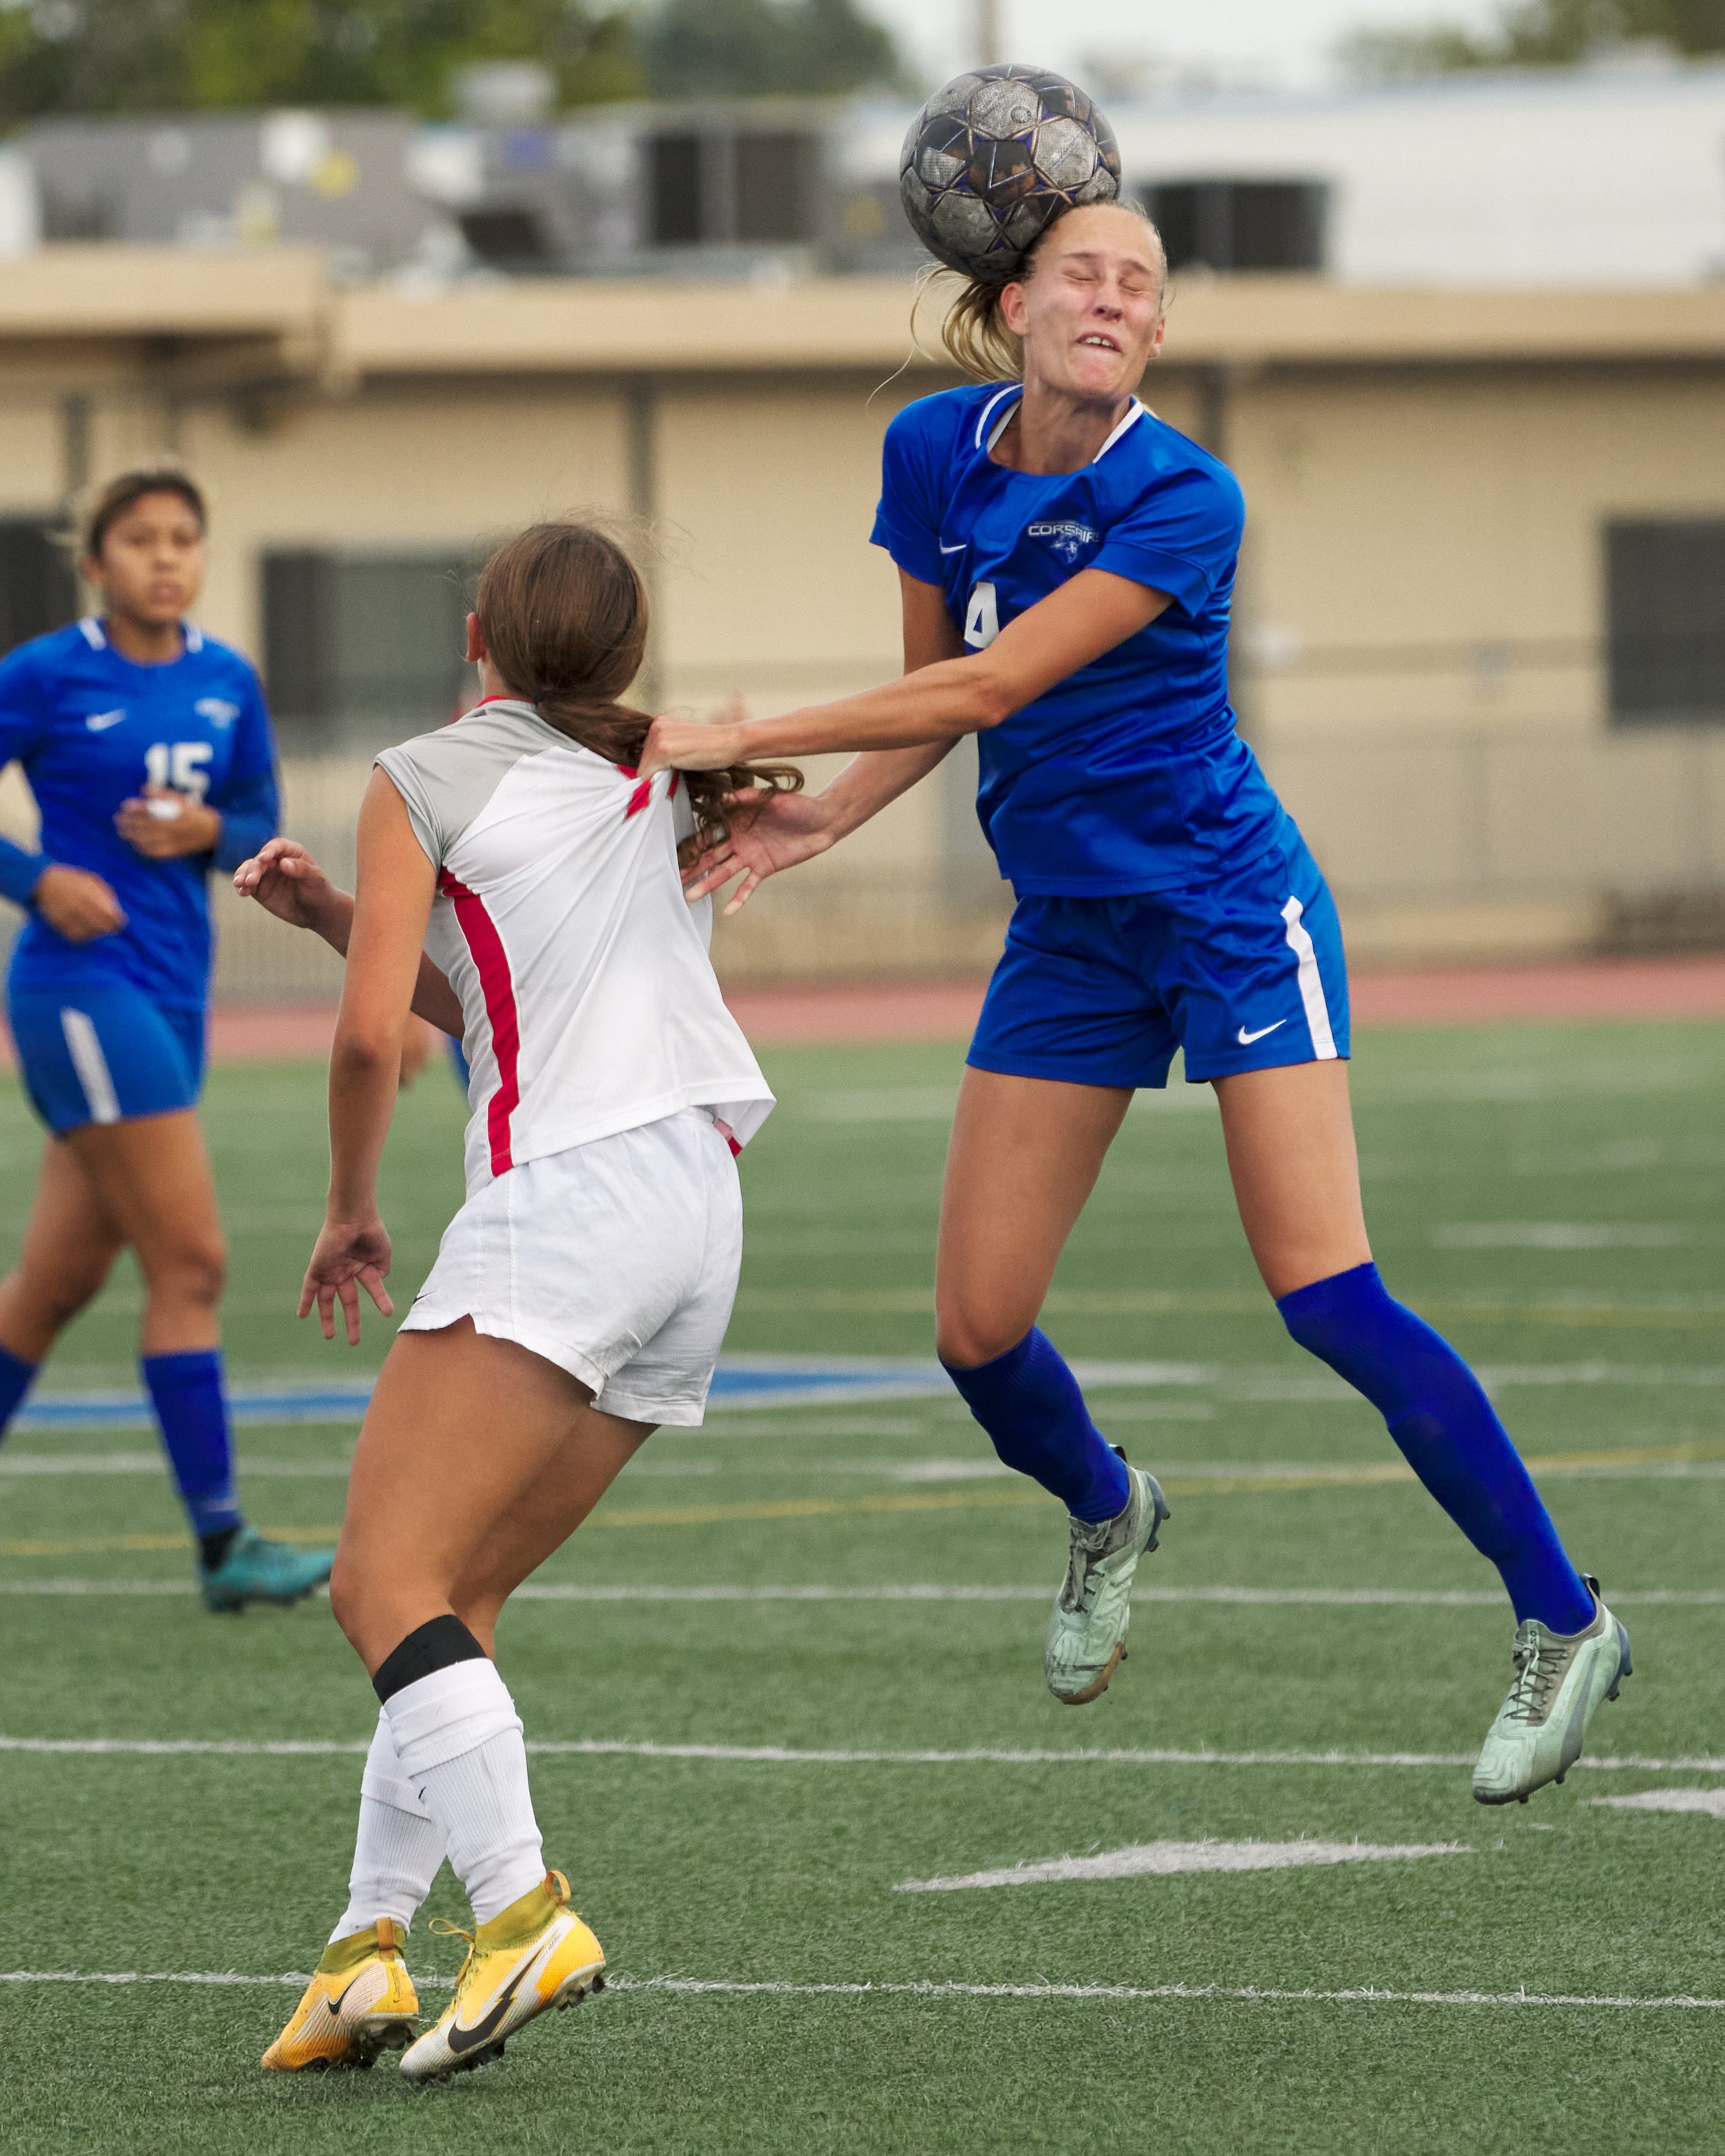  Santa Monica College Corsairs' Emma Rierstam (right) takes a ball to the head during the women's soccer match against the Bakersfield College Renegades on Friday, Oct. 20, 2022, at Corsair Field in Santa Monica, Calif. The Corsairs tied 1-1. (Nichol